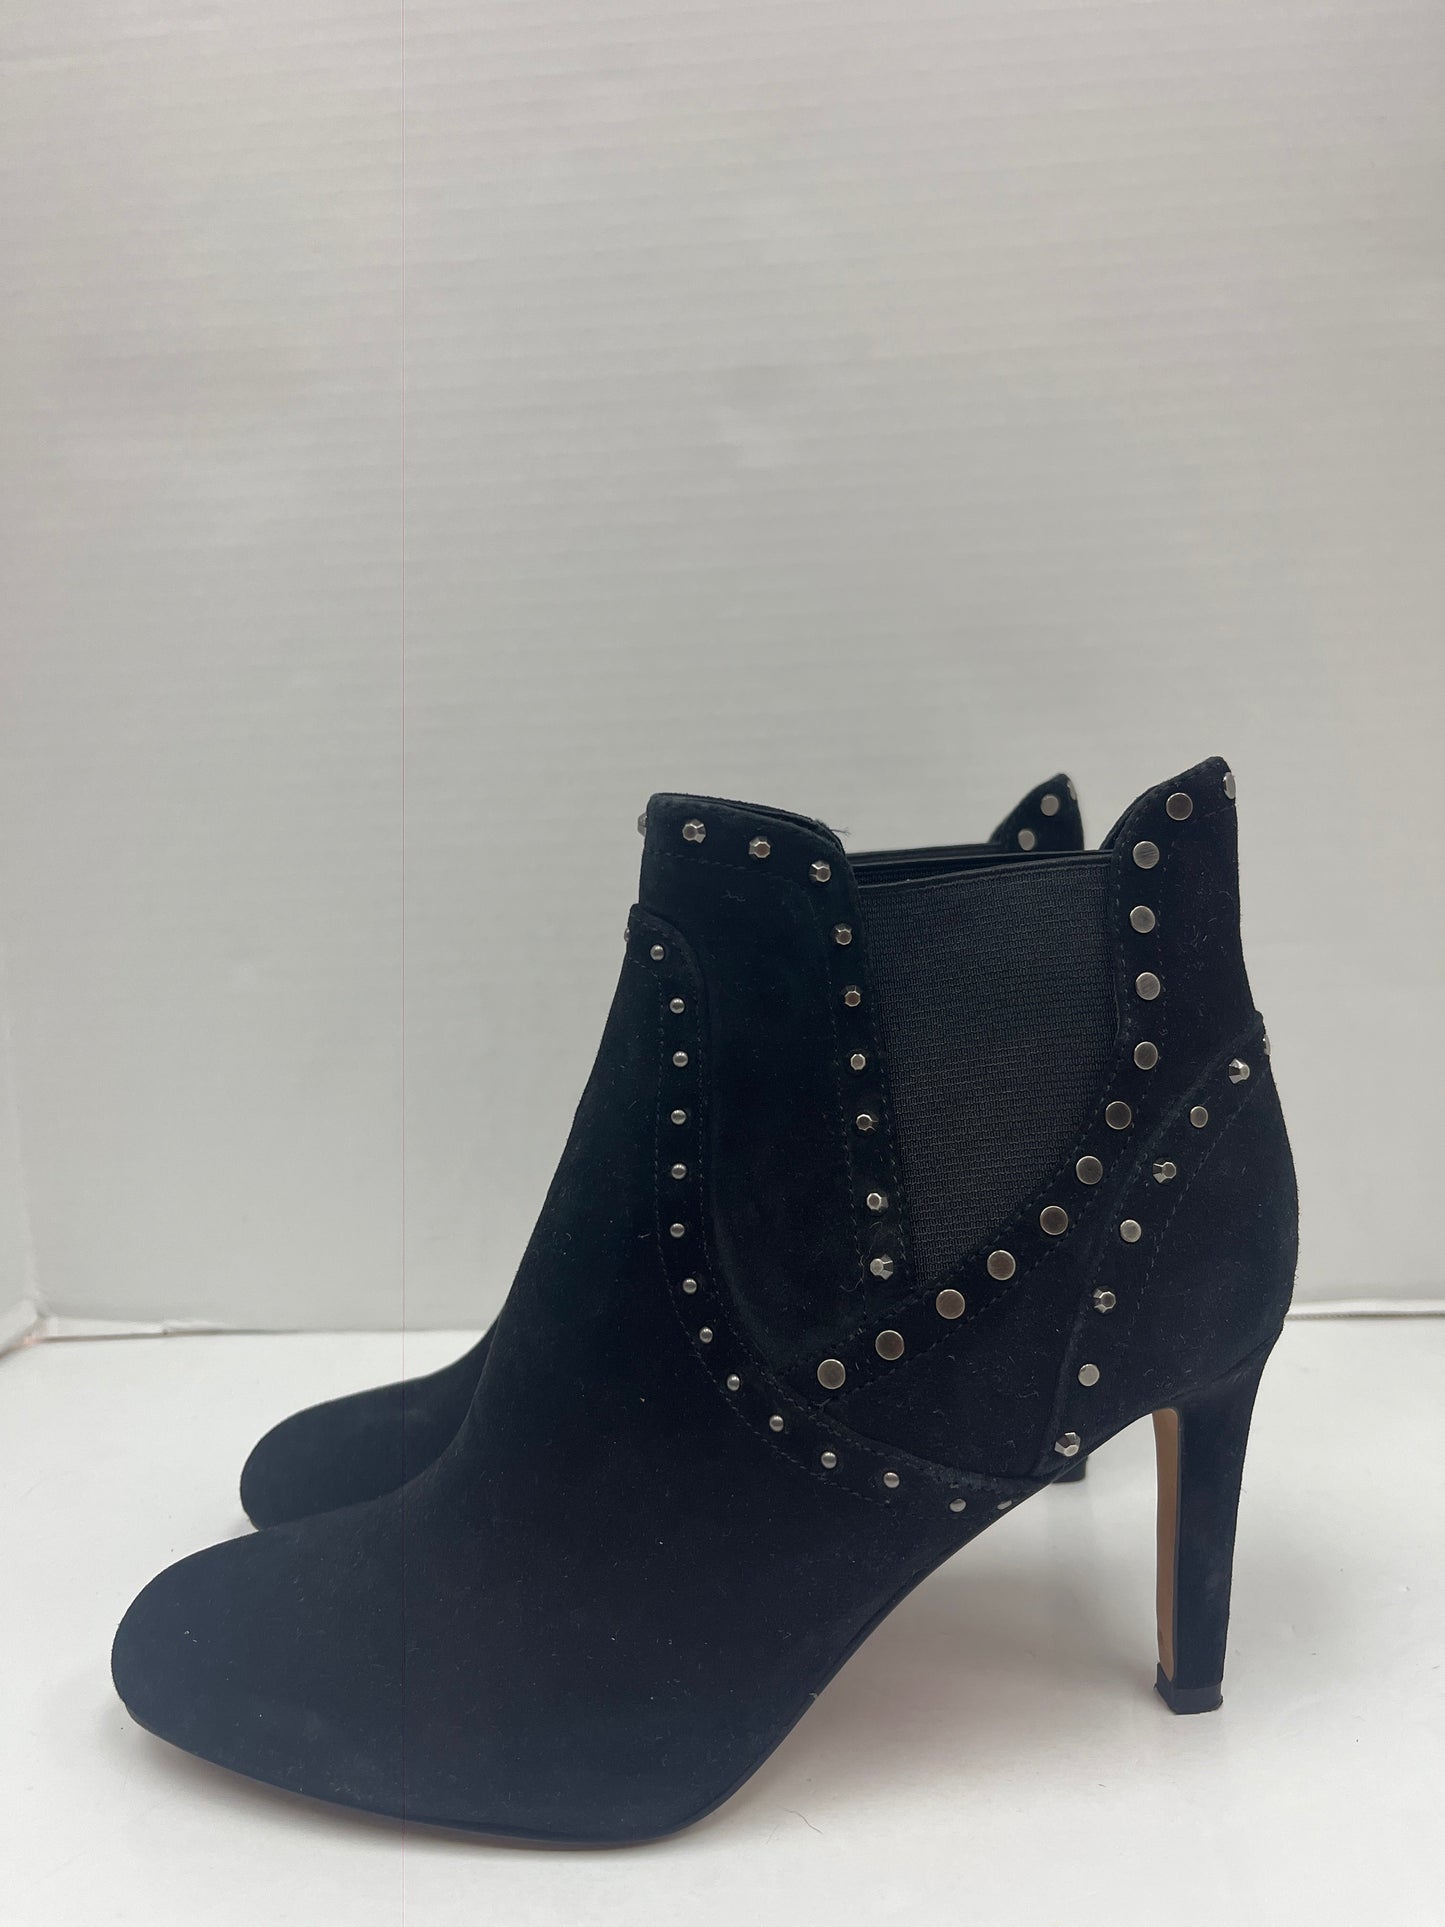 Boots Ankle Heels By Vince Camuto  Size: 8